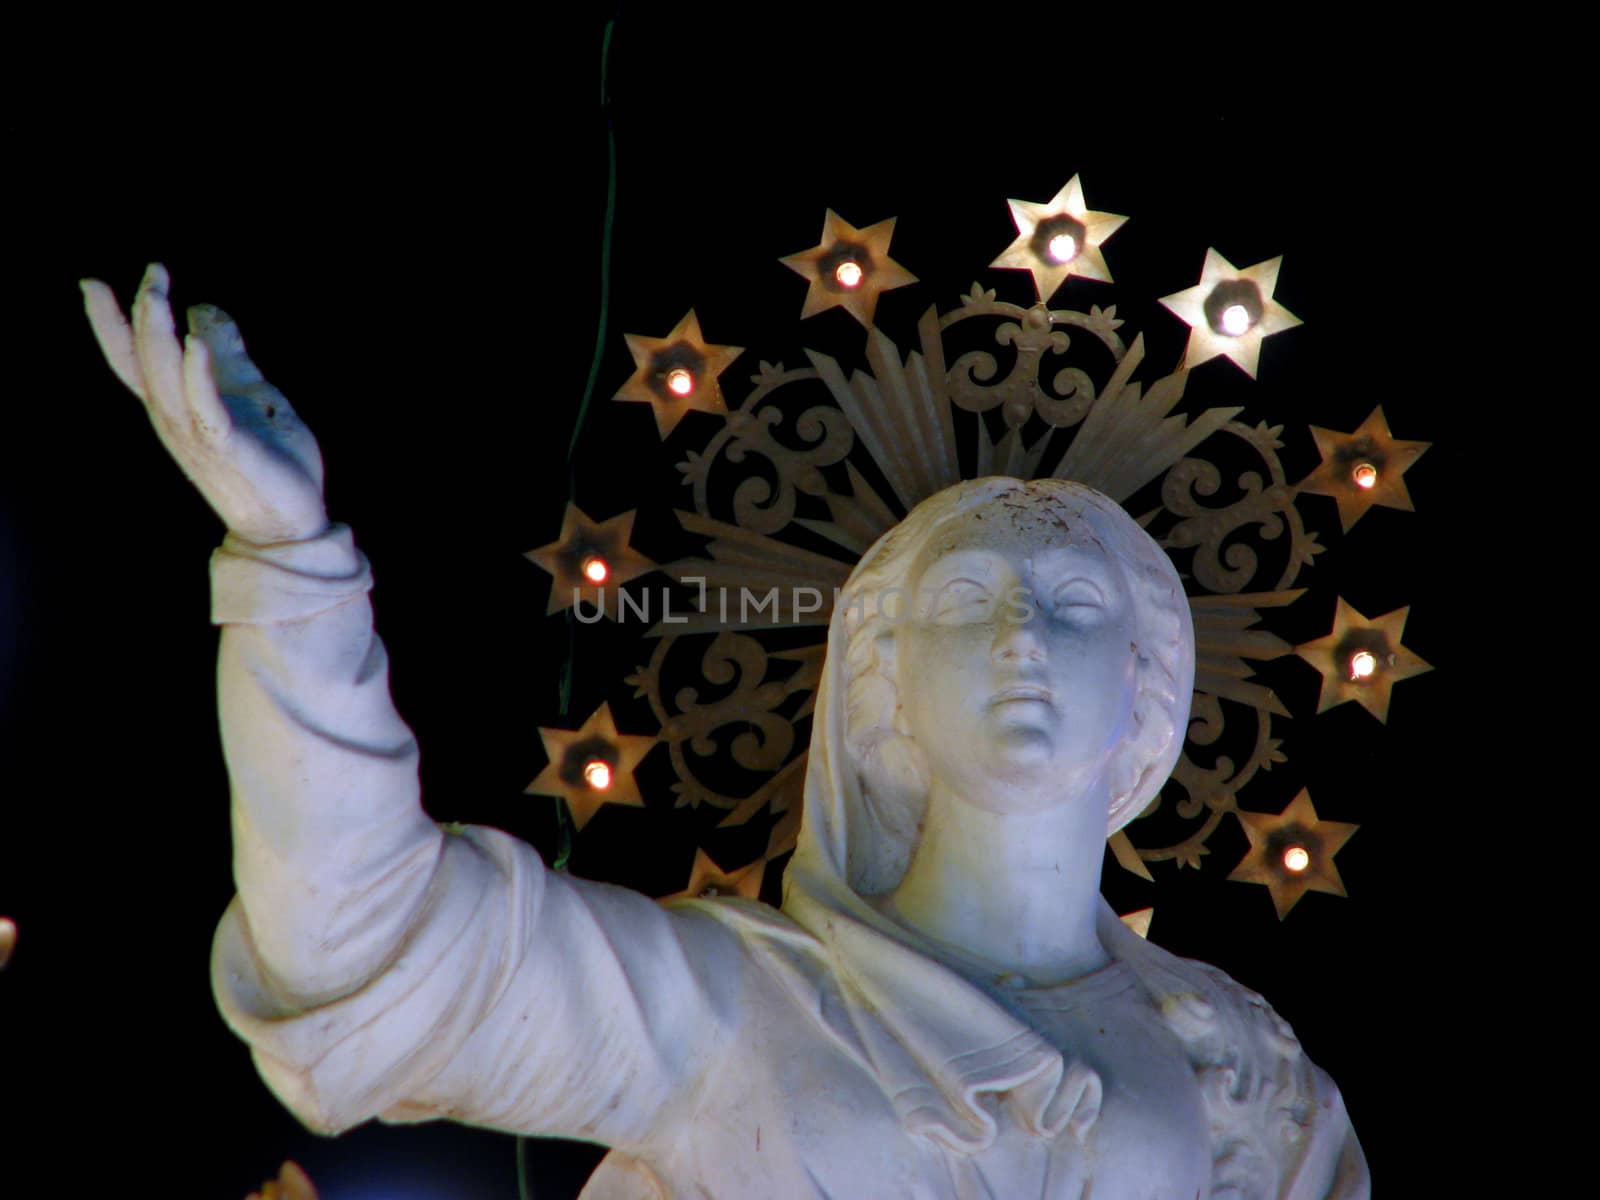 A detail of the stone statue of The Assumption of Our Lady in the church square of Ghaxaq, Malta.